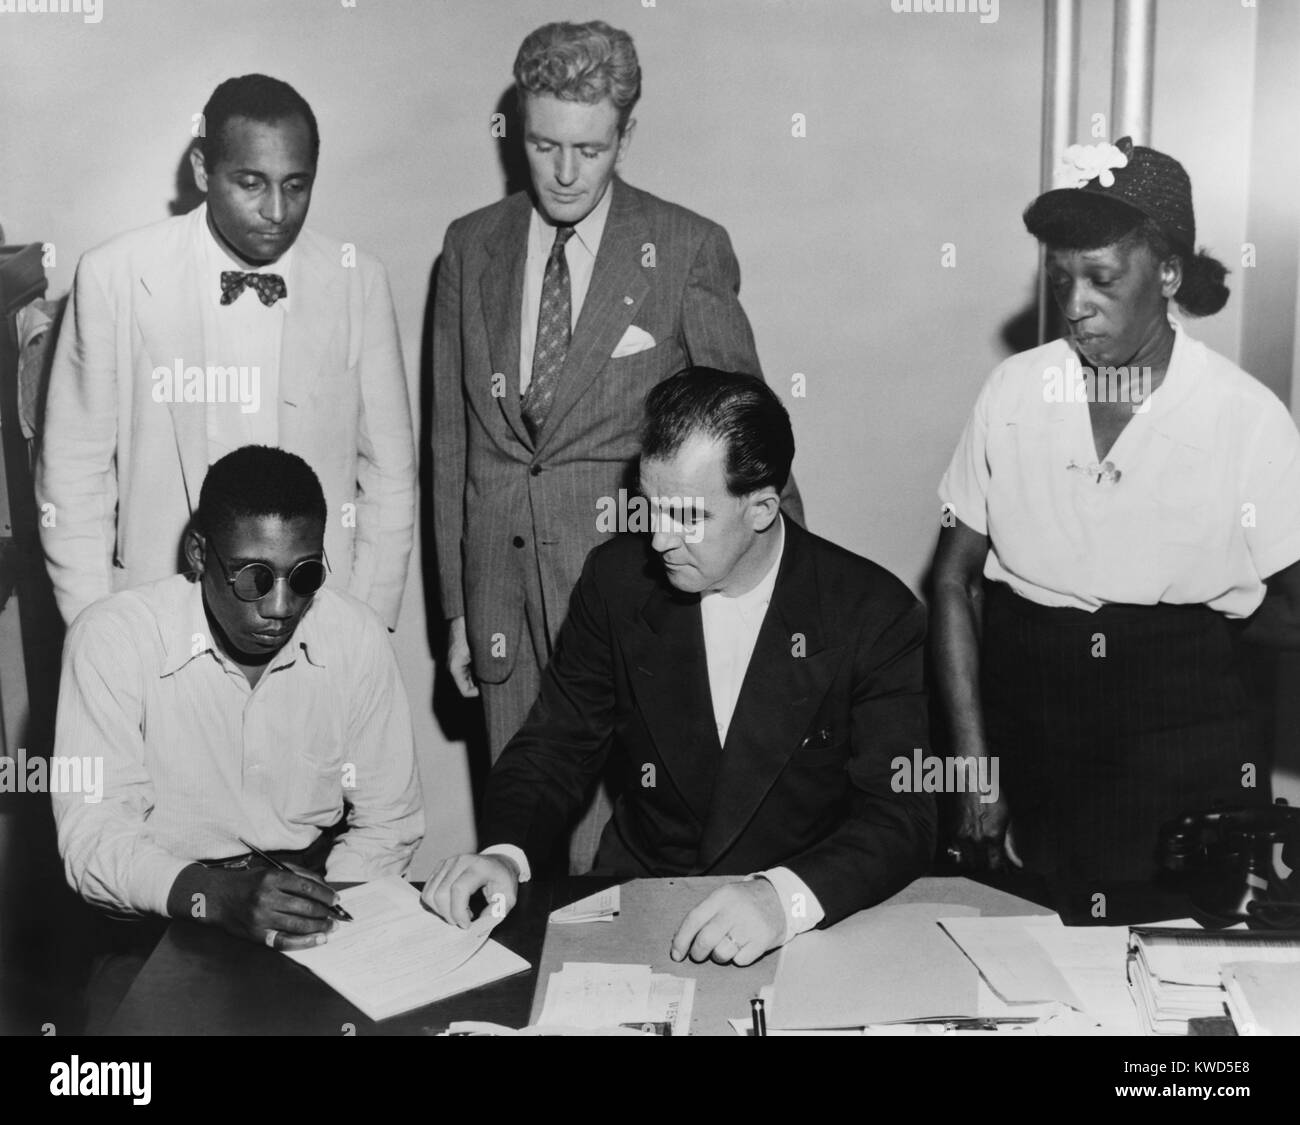 African American veteran Isaac Woodard was blinded by Batesburg, South Carolina police. Feb. 12, 1946. He was arrested, and beaten in jail in apparent retaliation for arguing with a bus driver. He was still in his military uniform, hours after being honorably discharged from the United States Army. In photo, NAACP staff assist him in preparing his disability claim to the Veterans administration. (BSLOC 2014 13 111) Stock Photo